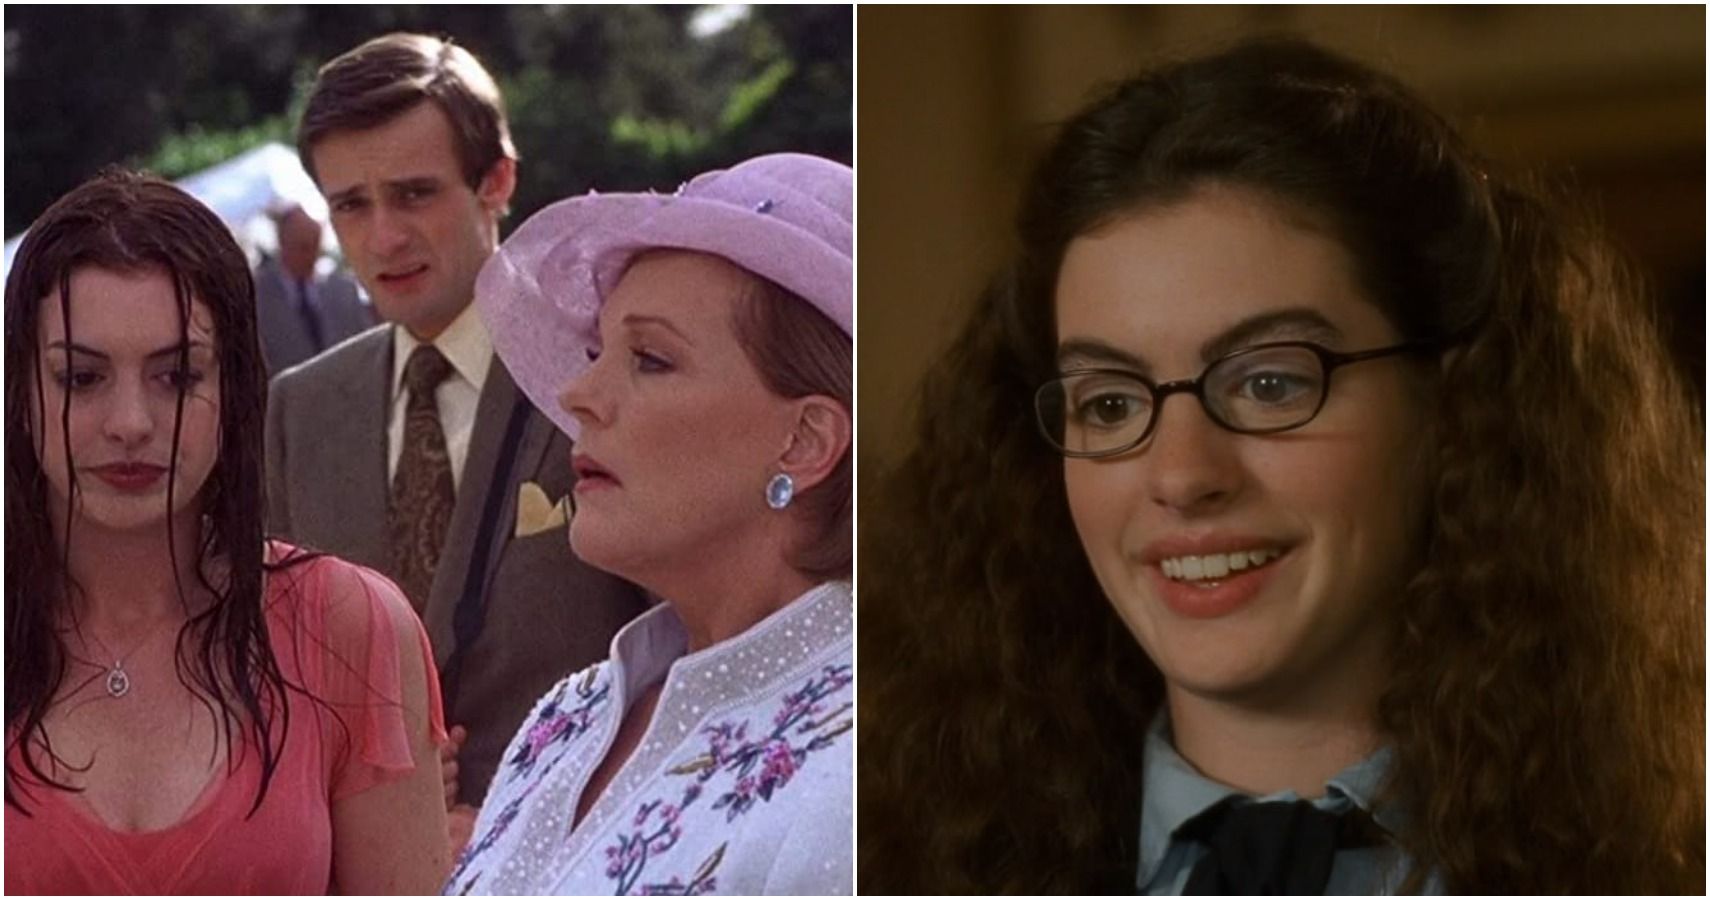 Which Princess Movie Is Better Princess Diaries Vs The Royal Engagement.